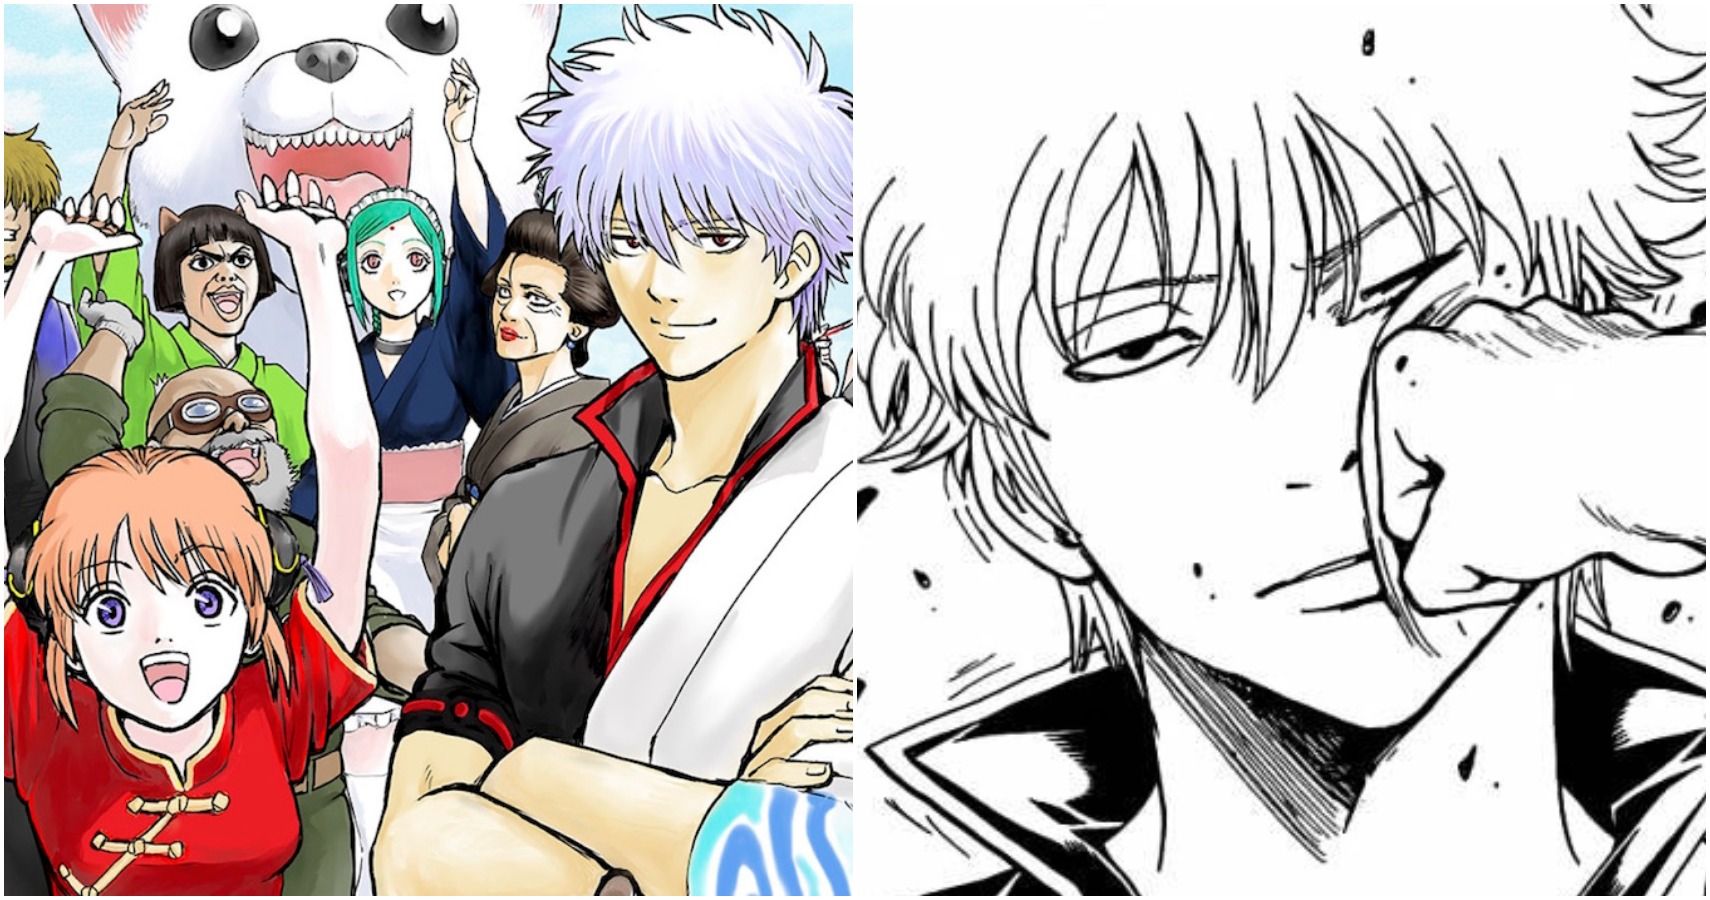 gintama split image: anime characters/Gintoki getting punched in the face in the manga